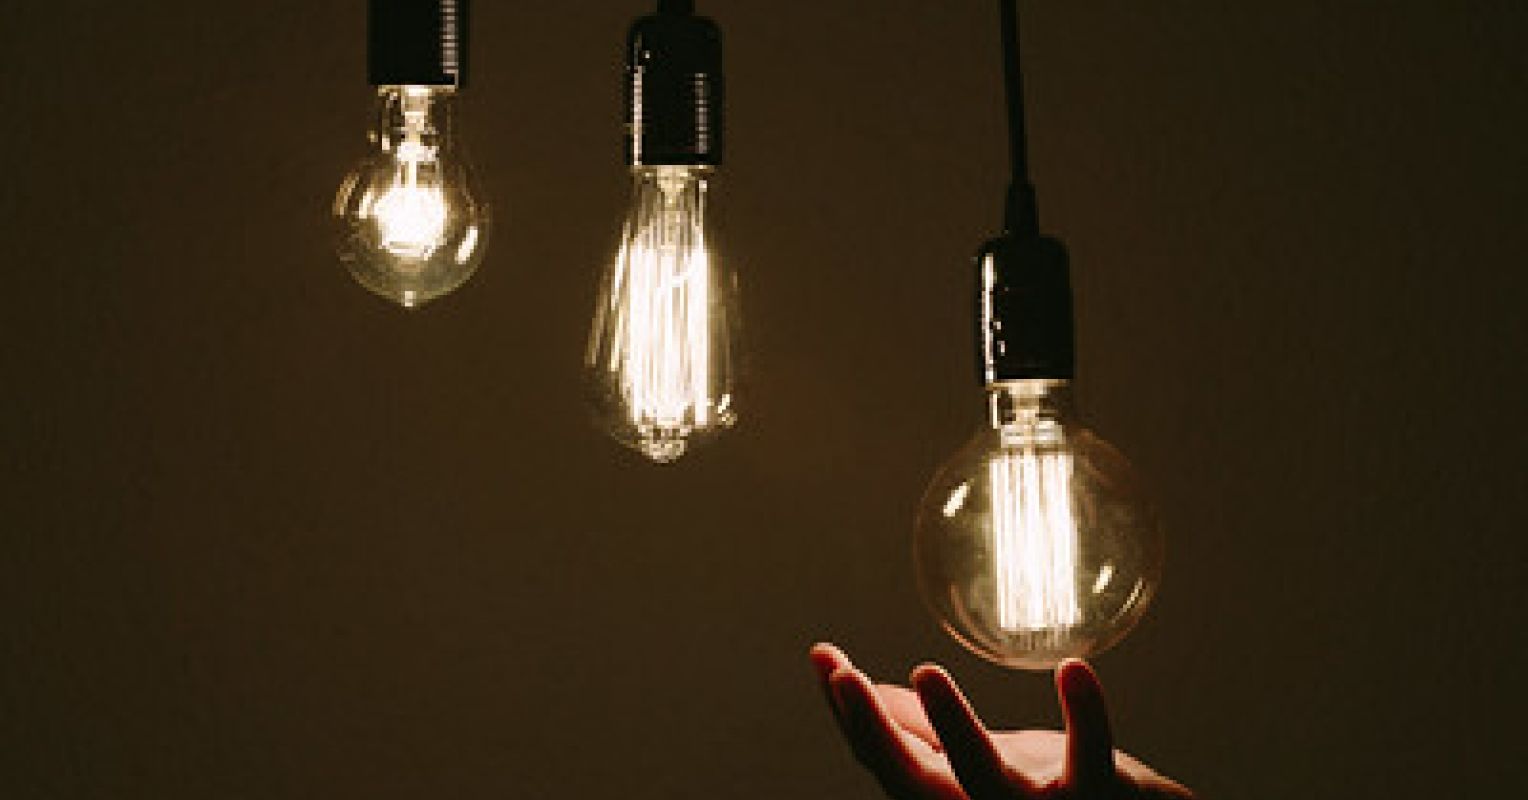 Making the Most of Your Best Ideas | Psychology Today